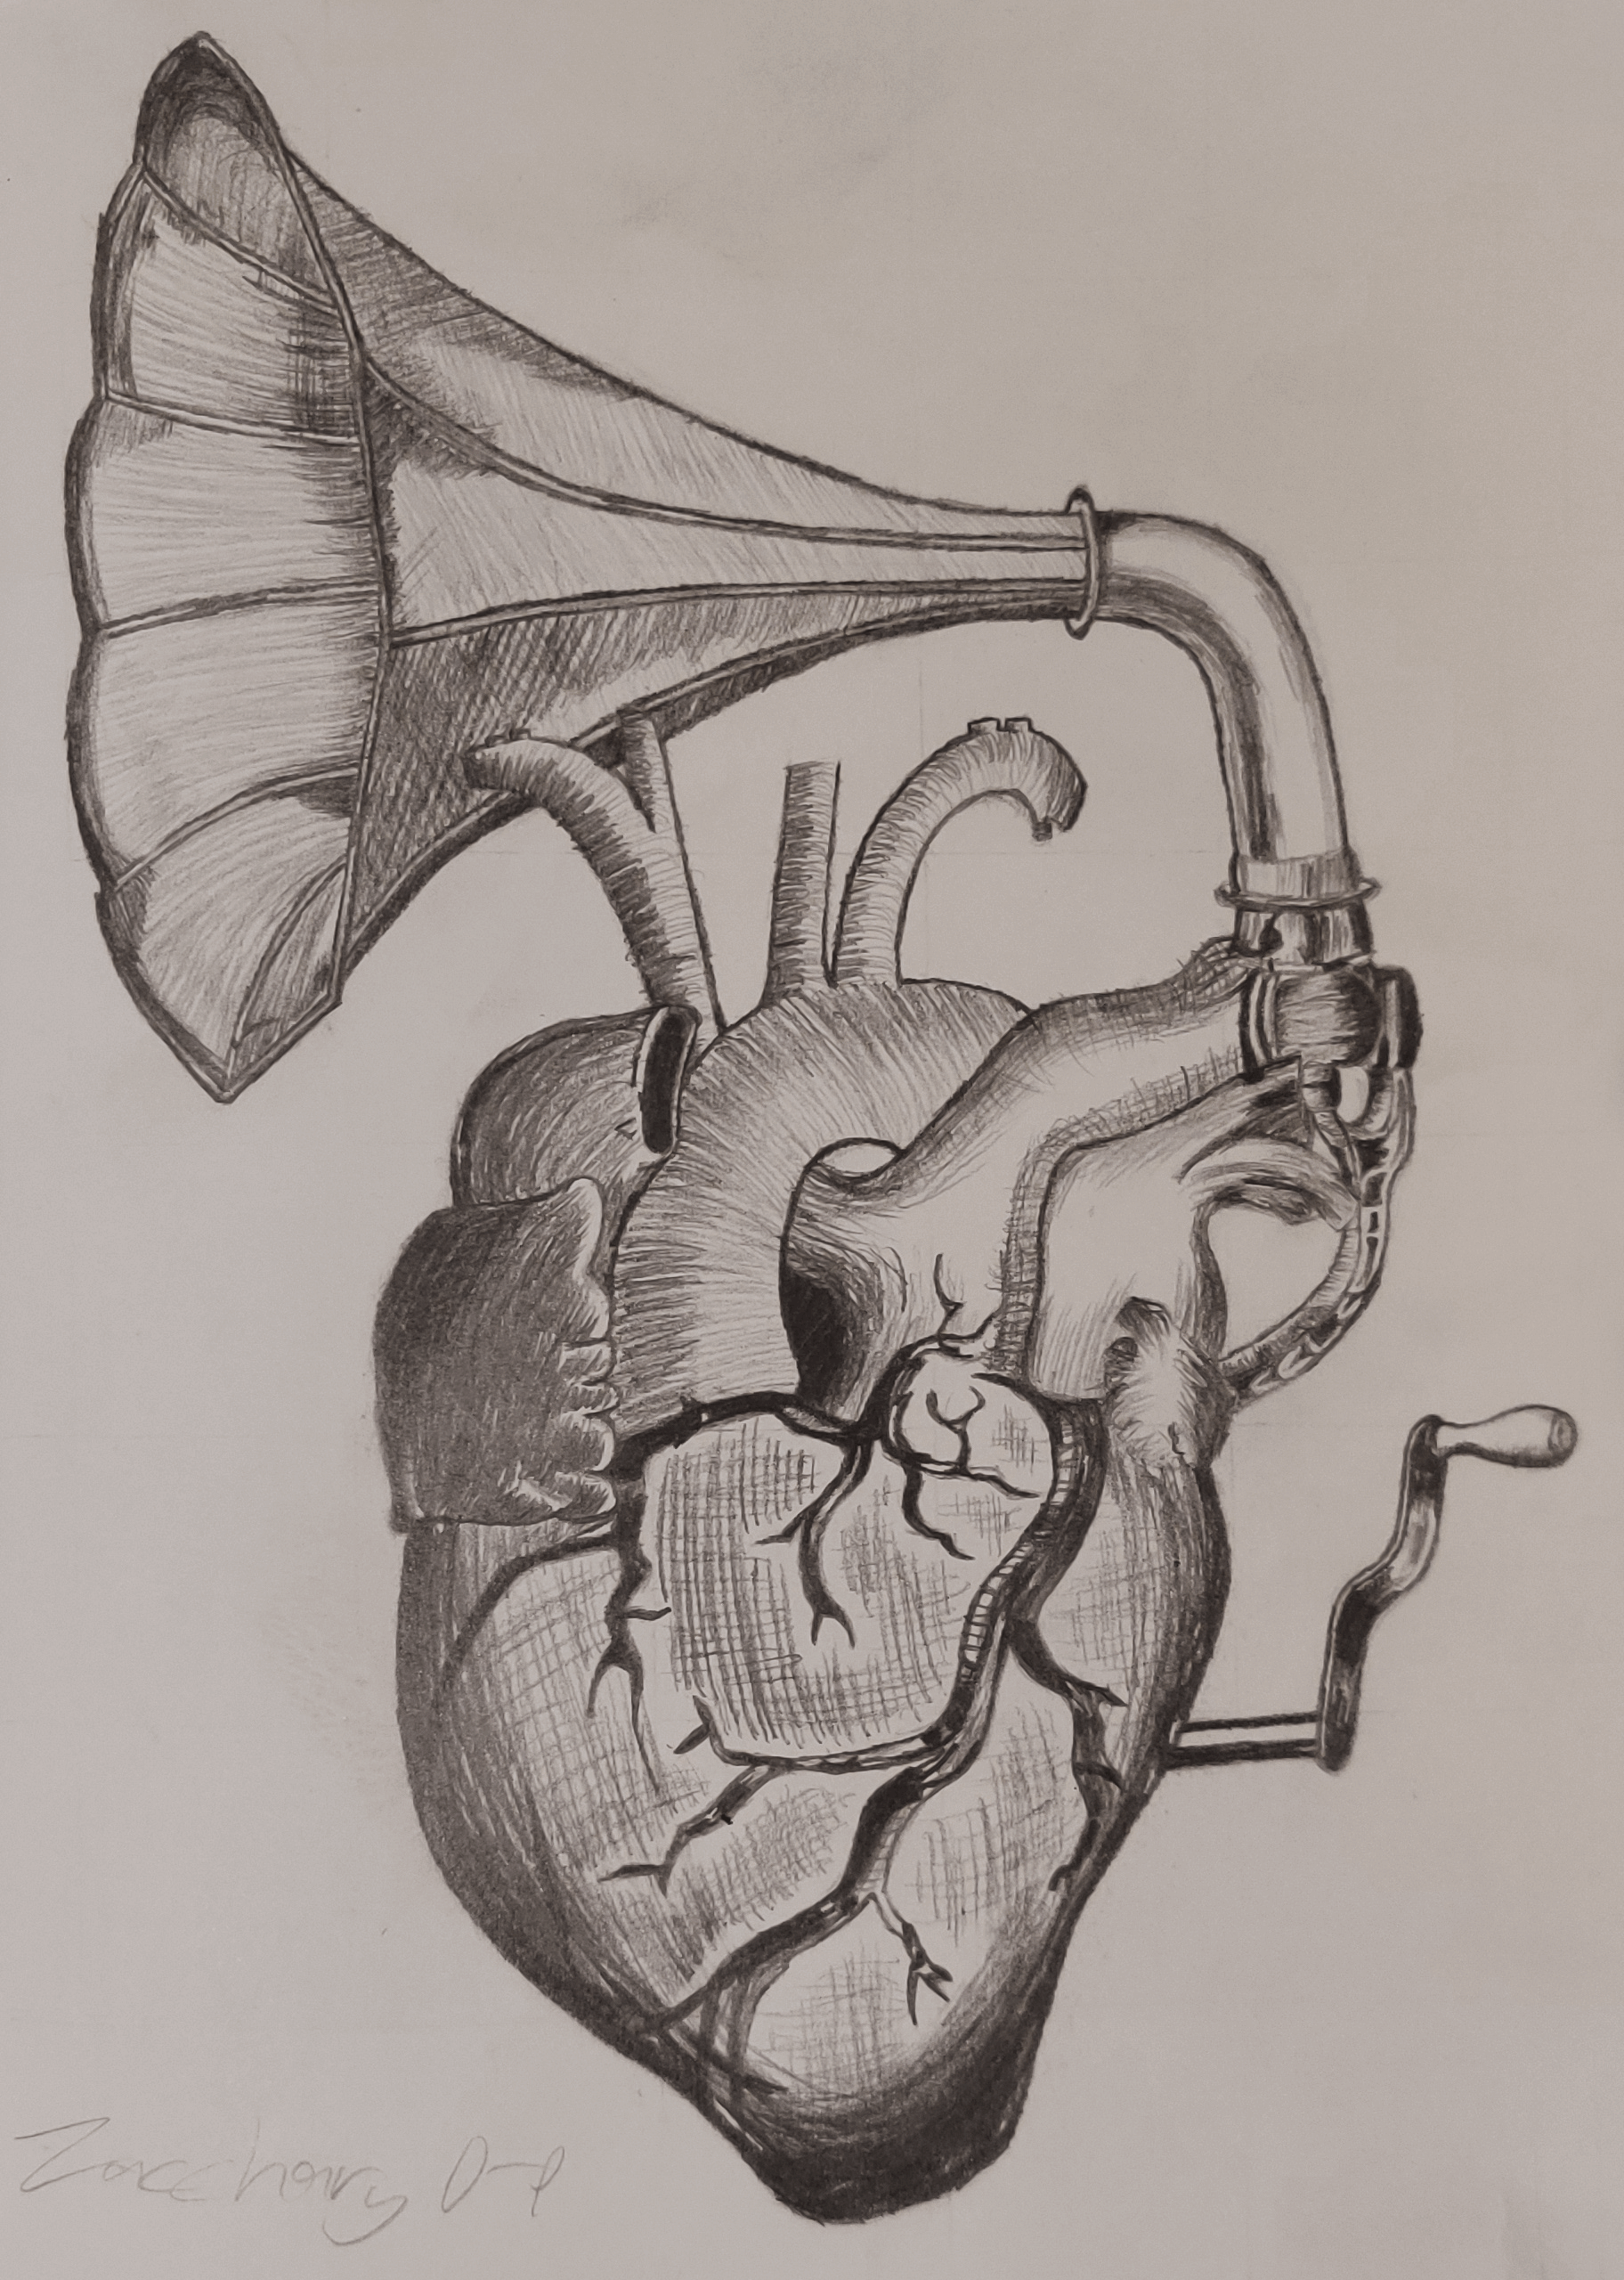 A hatching drawing of a heart with a gramophone horn coming from the top.